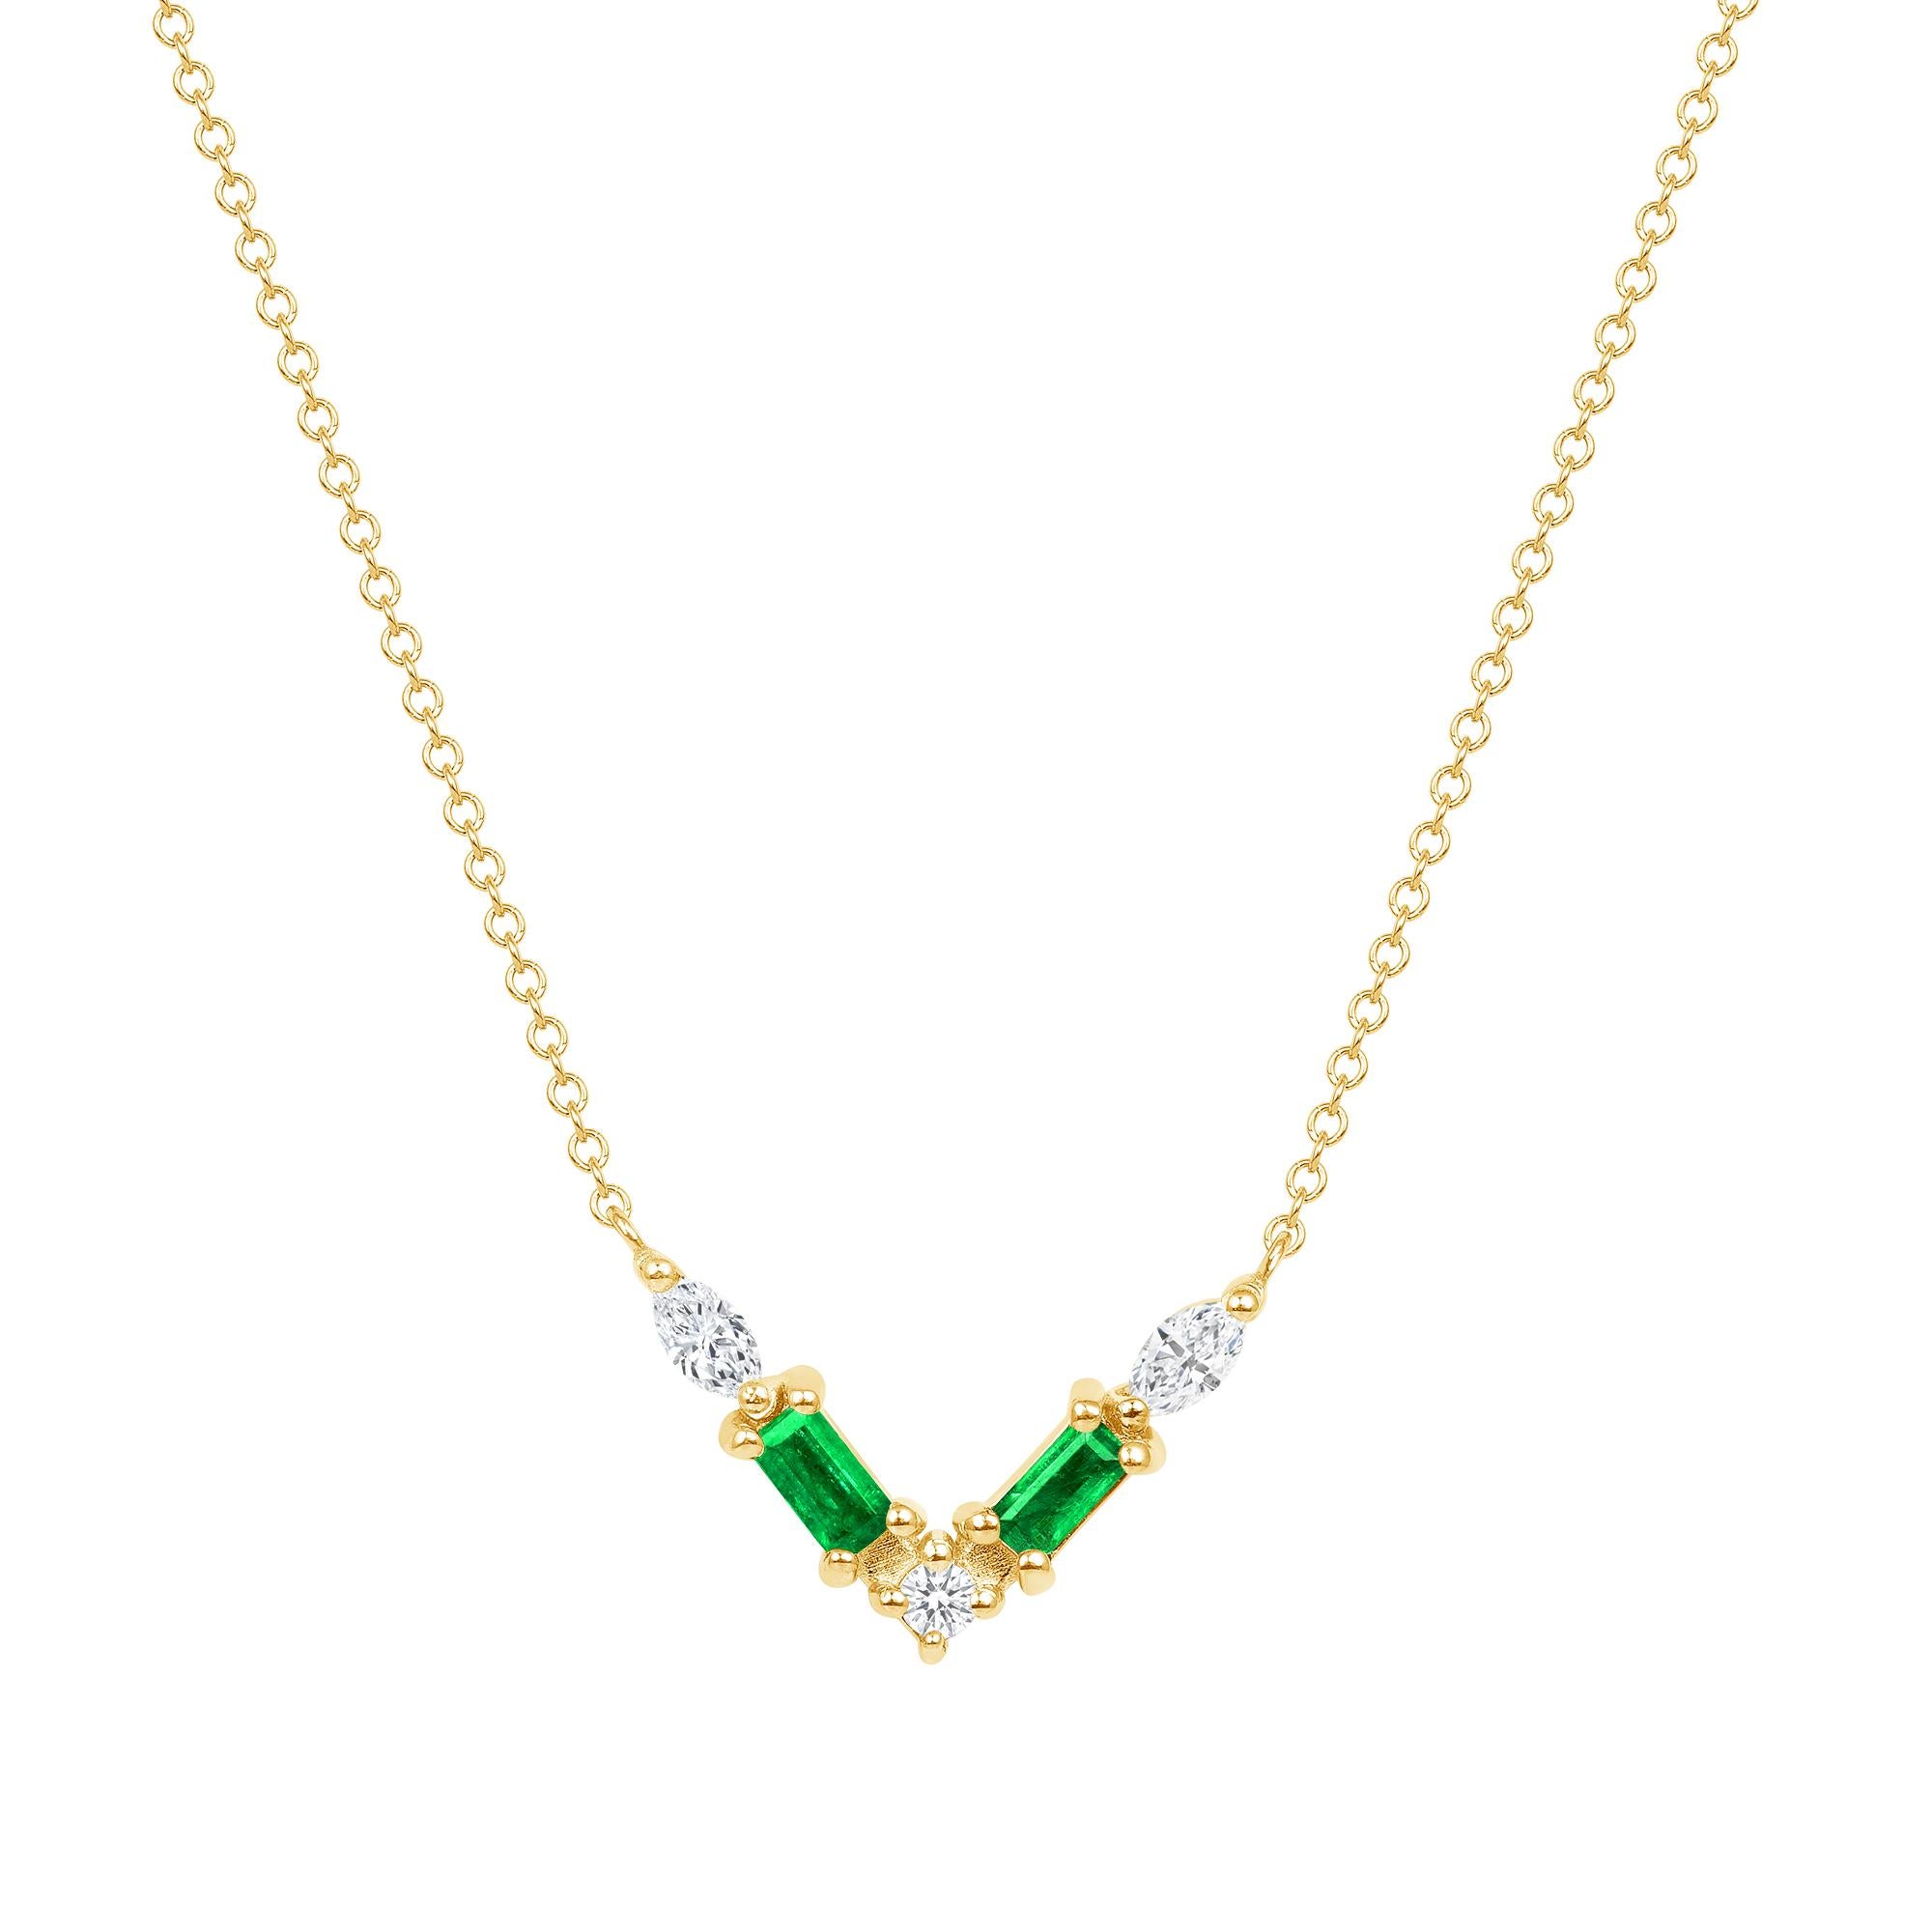 Crafted in 14K gold, this necklace features a thoughtfully arranged collection of emerald and diamond pavé, elegantly set along a V-shaped plane. Crafted in 14K white gold, it exudes delicacy and emotion, showcasing a captivating color palette.